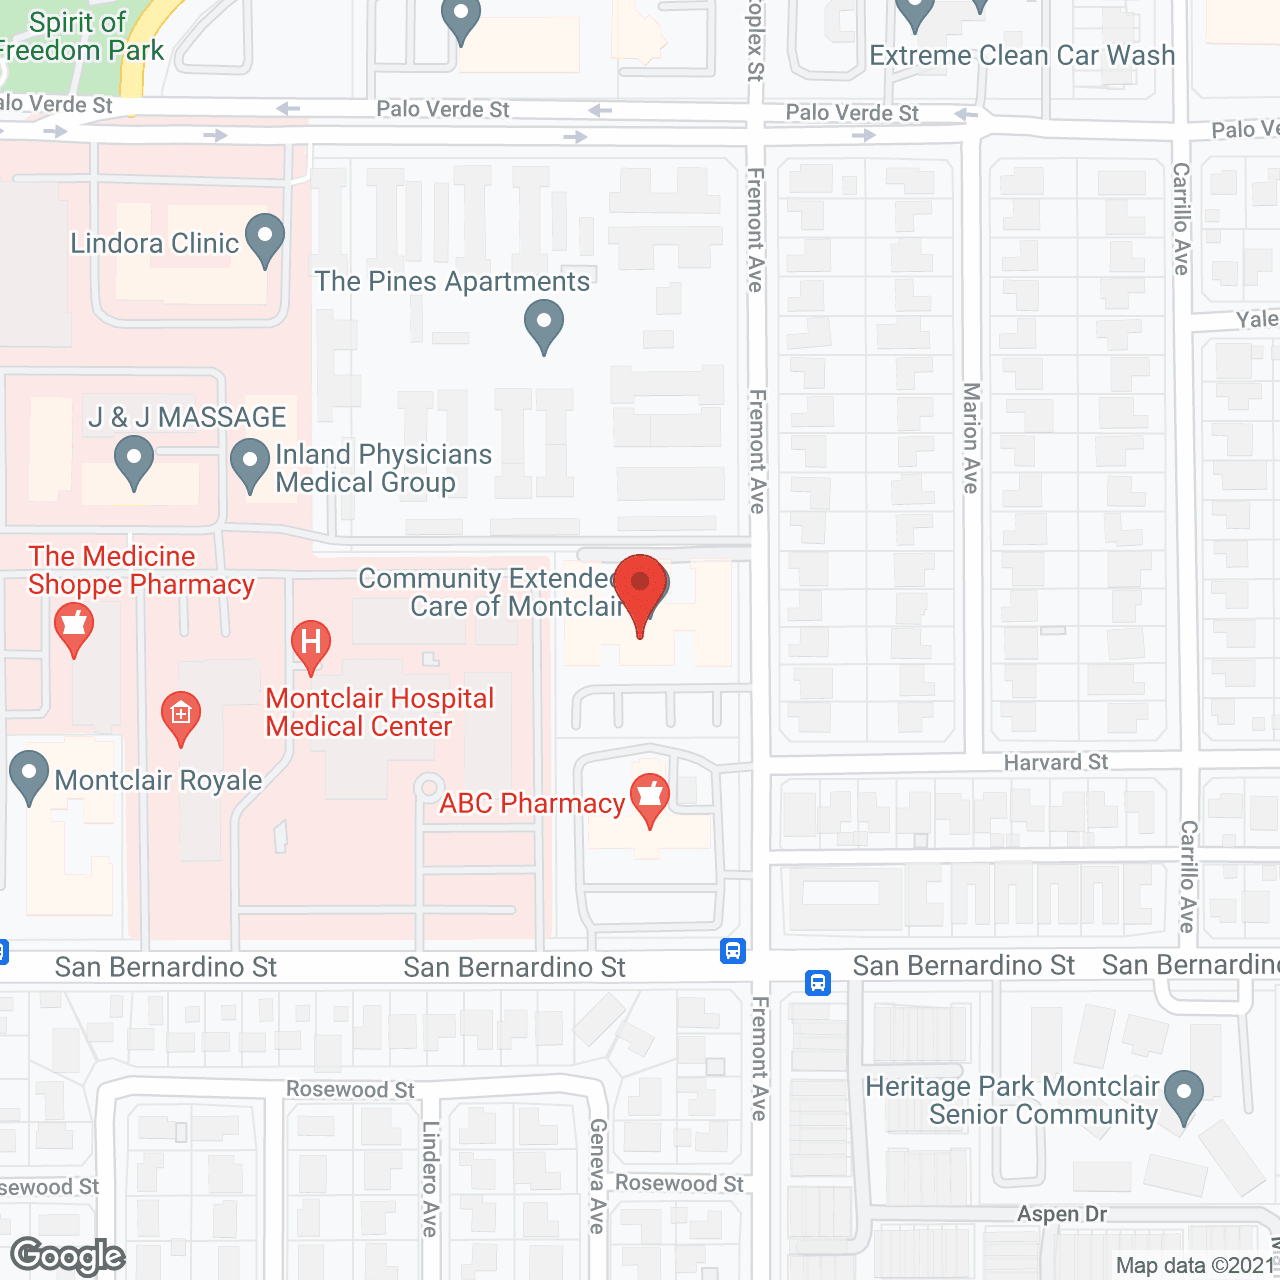 Community Extended Care of Montclair in google map